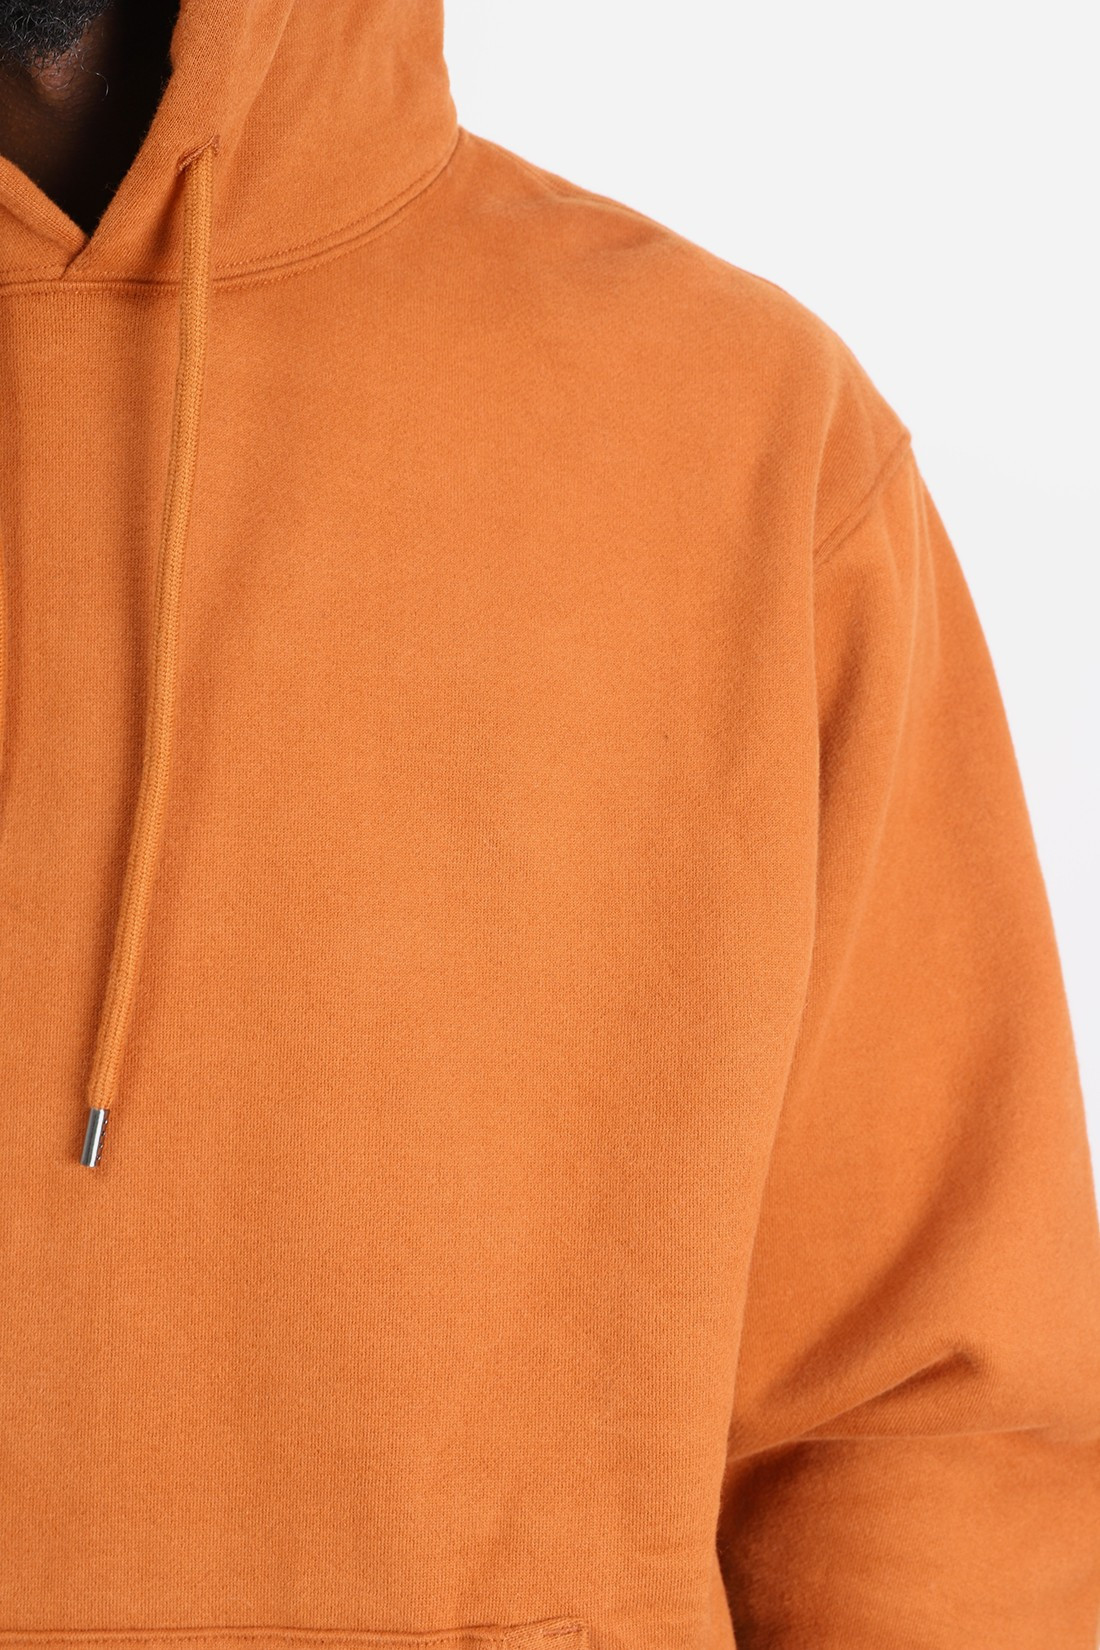 LEVI'S ® MADE AND CRAFTED / Lmc relaxed hoodie ™ Caramel cafe